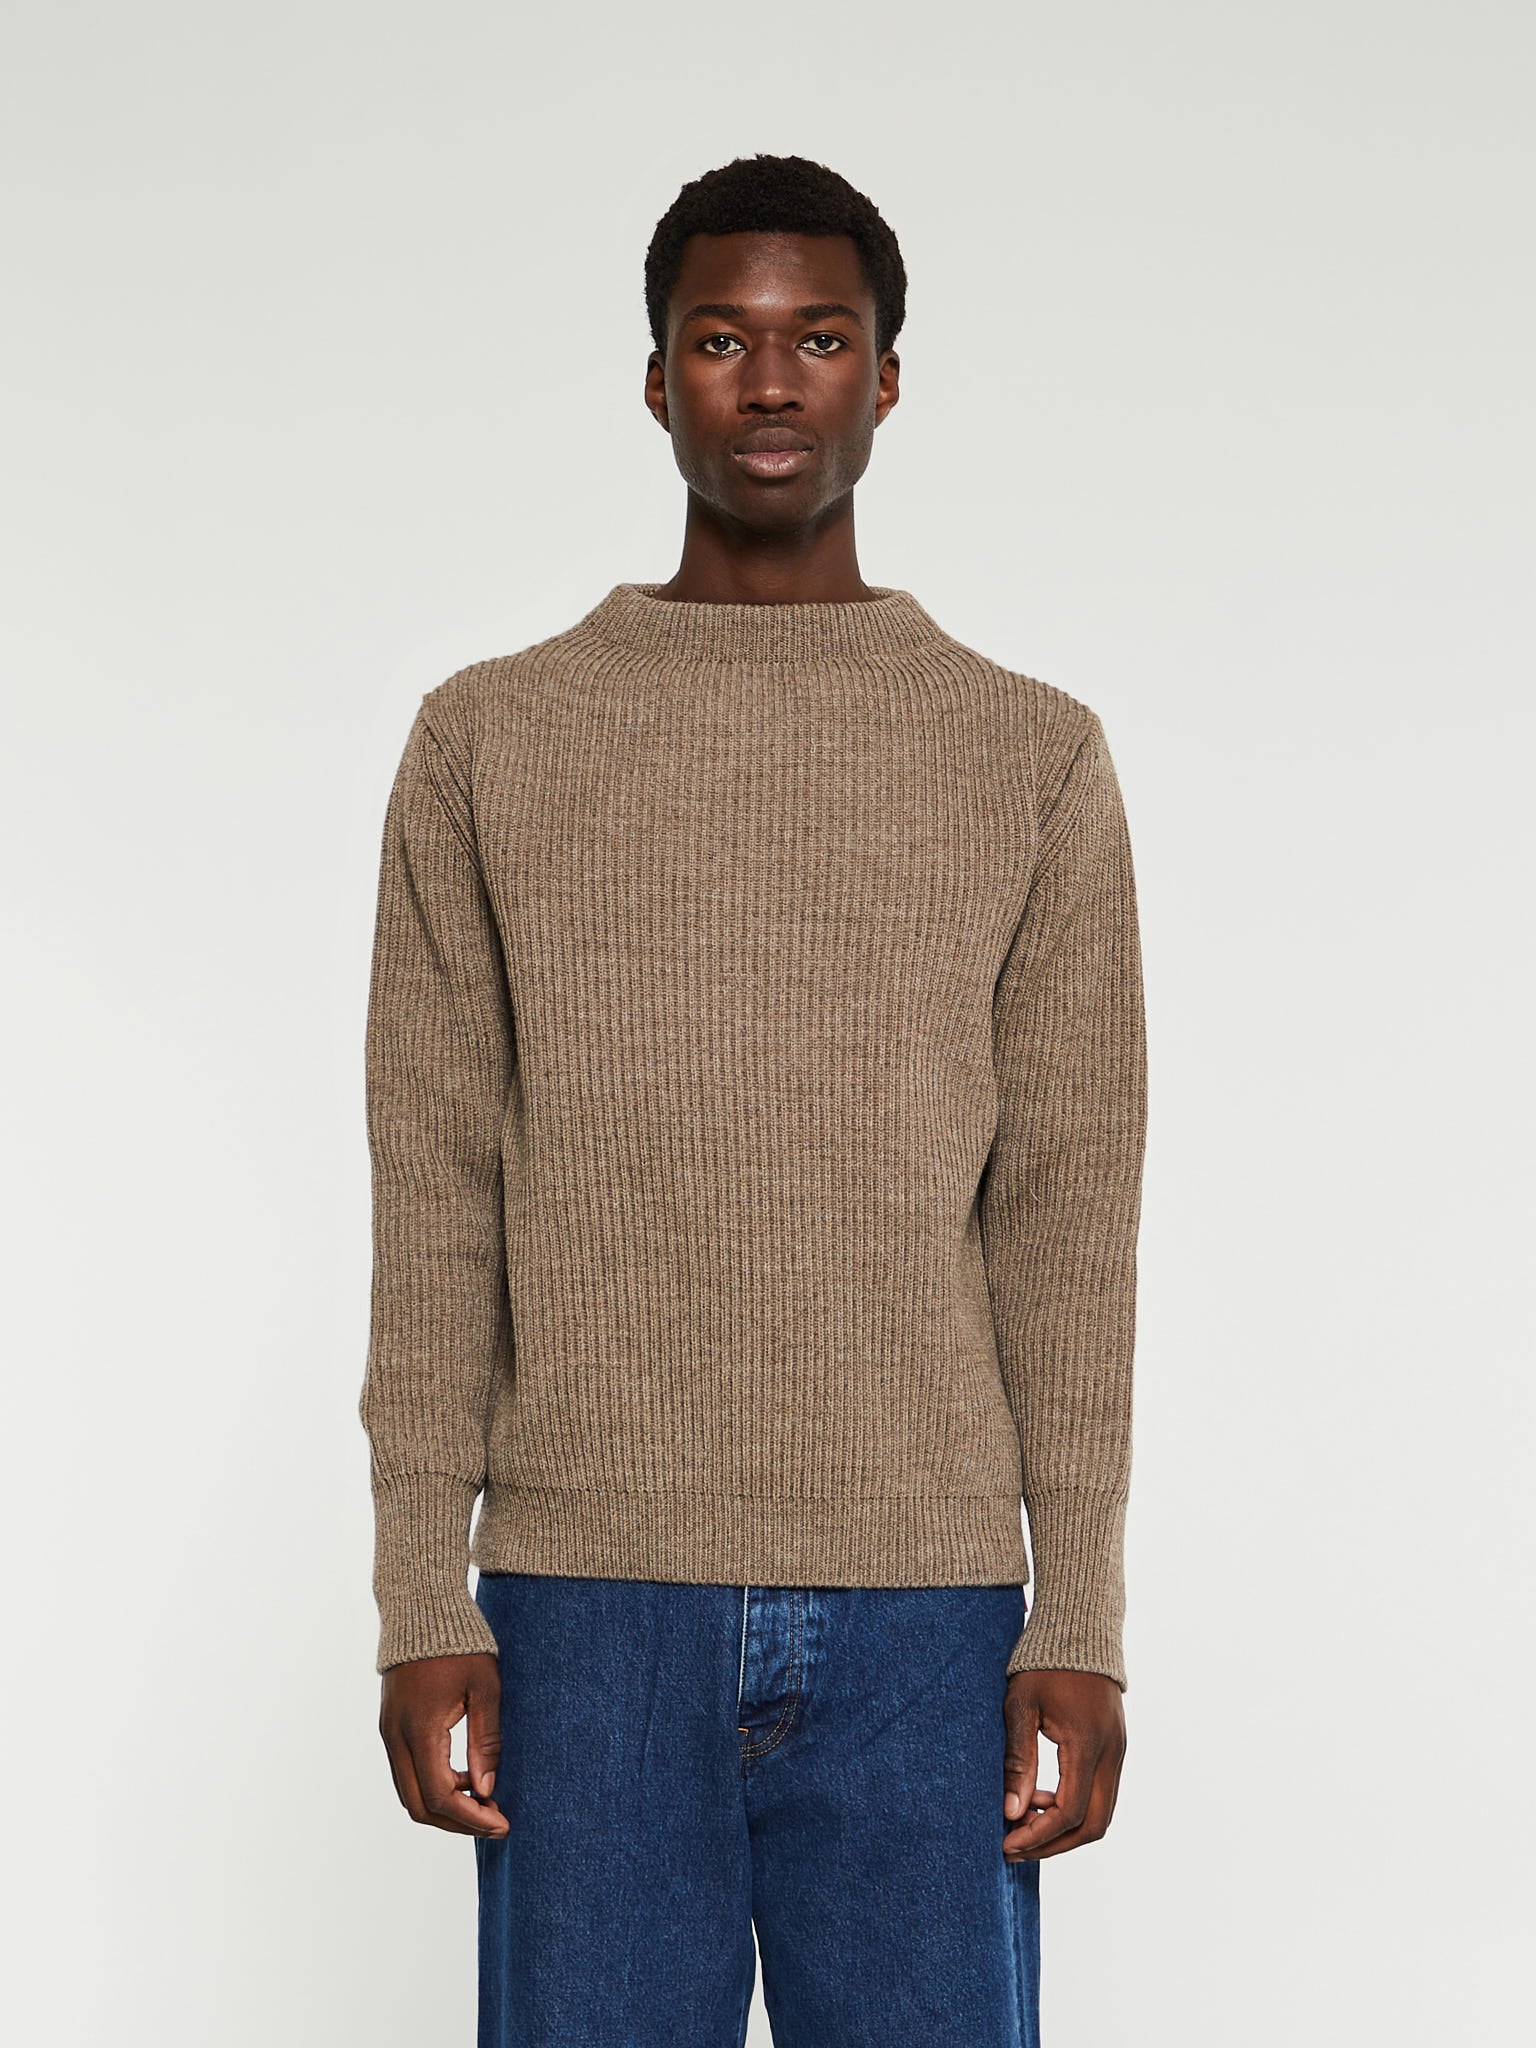 Navy Crewneck Knit in Natural Taupe